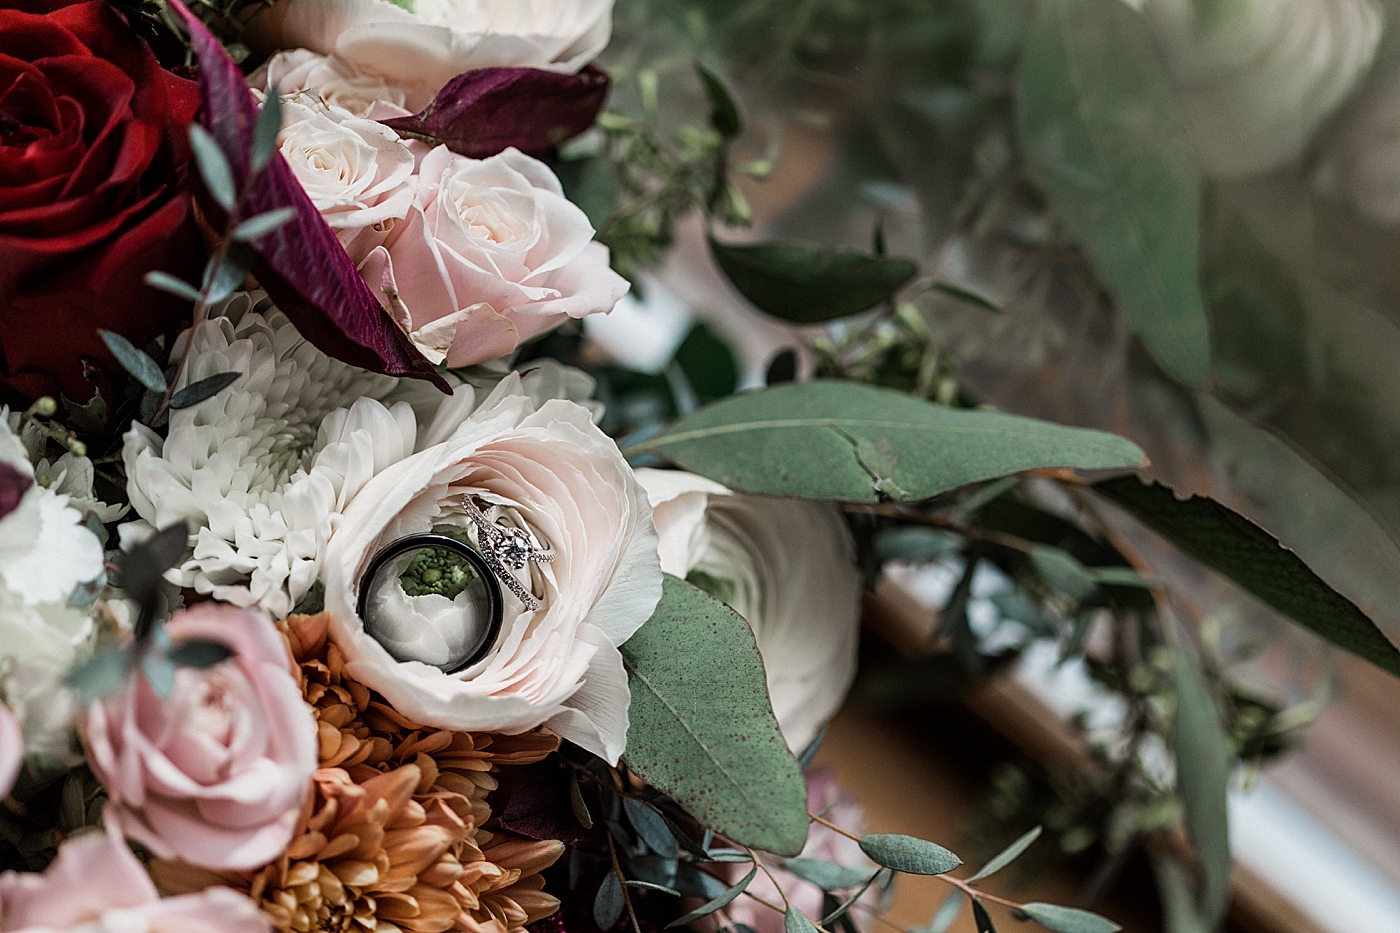 Wedding rings in bridal bouquet. Photo by Megan Montalvo Photography.